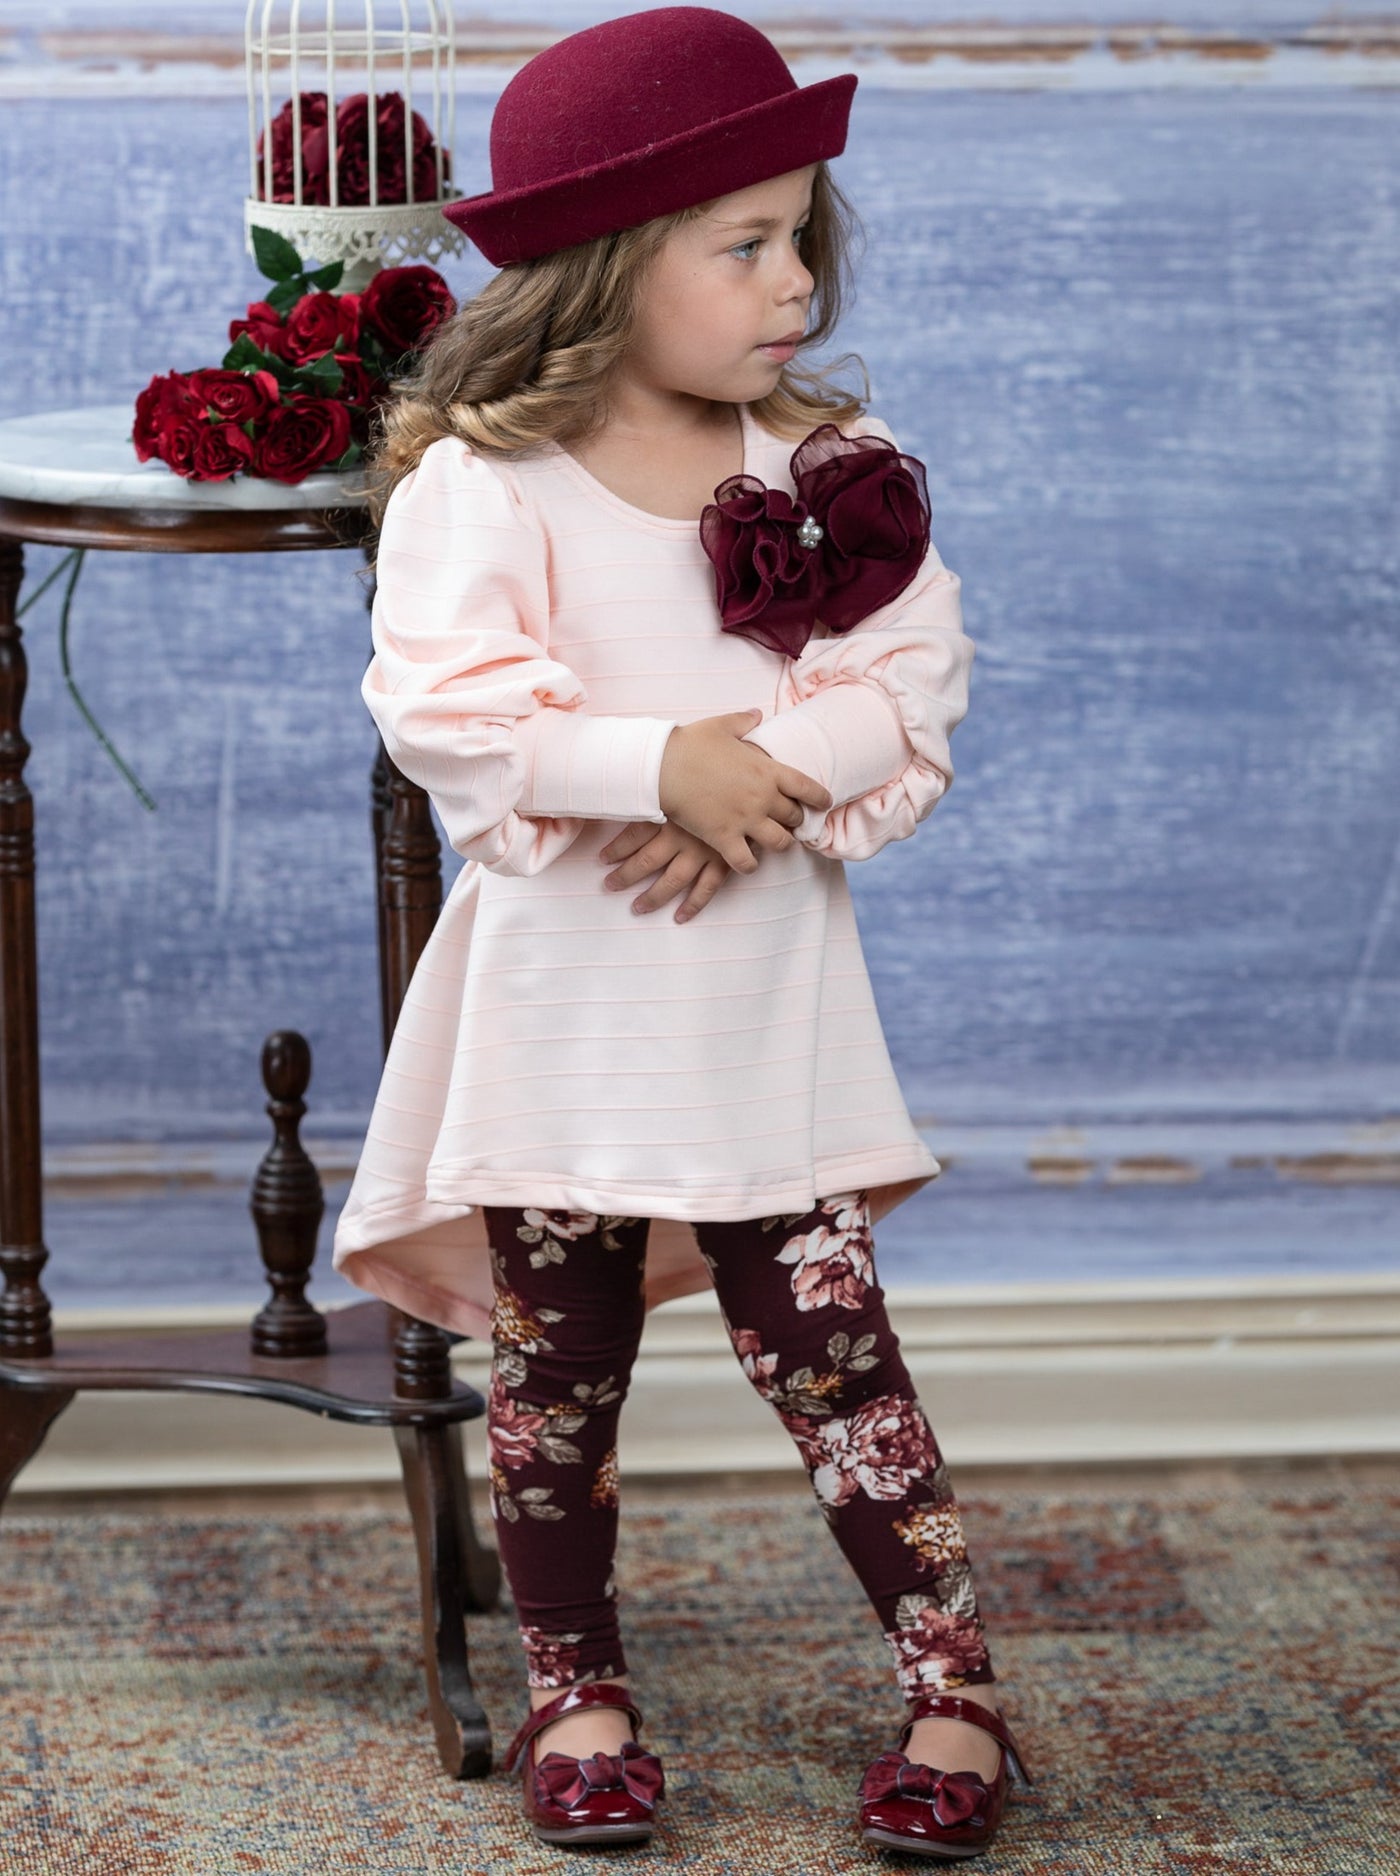 Cute Outfits For Girls | Thalia Top & Floral Legging Set | Girls BoutiqueCute Outfits For Girls | Thalia Top & Floral Legging Set | Girls Boutique